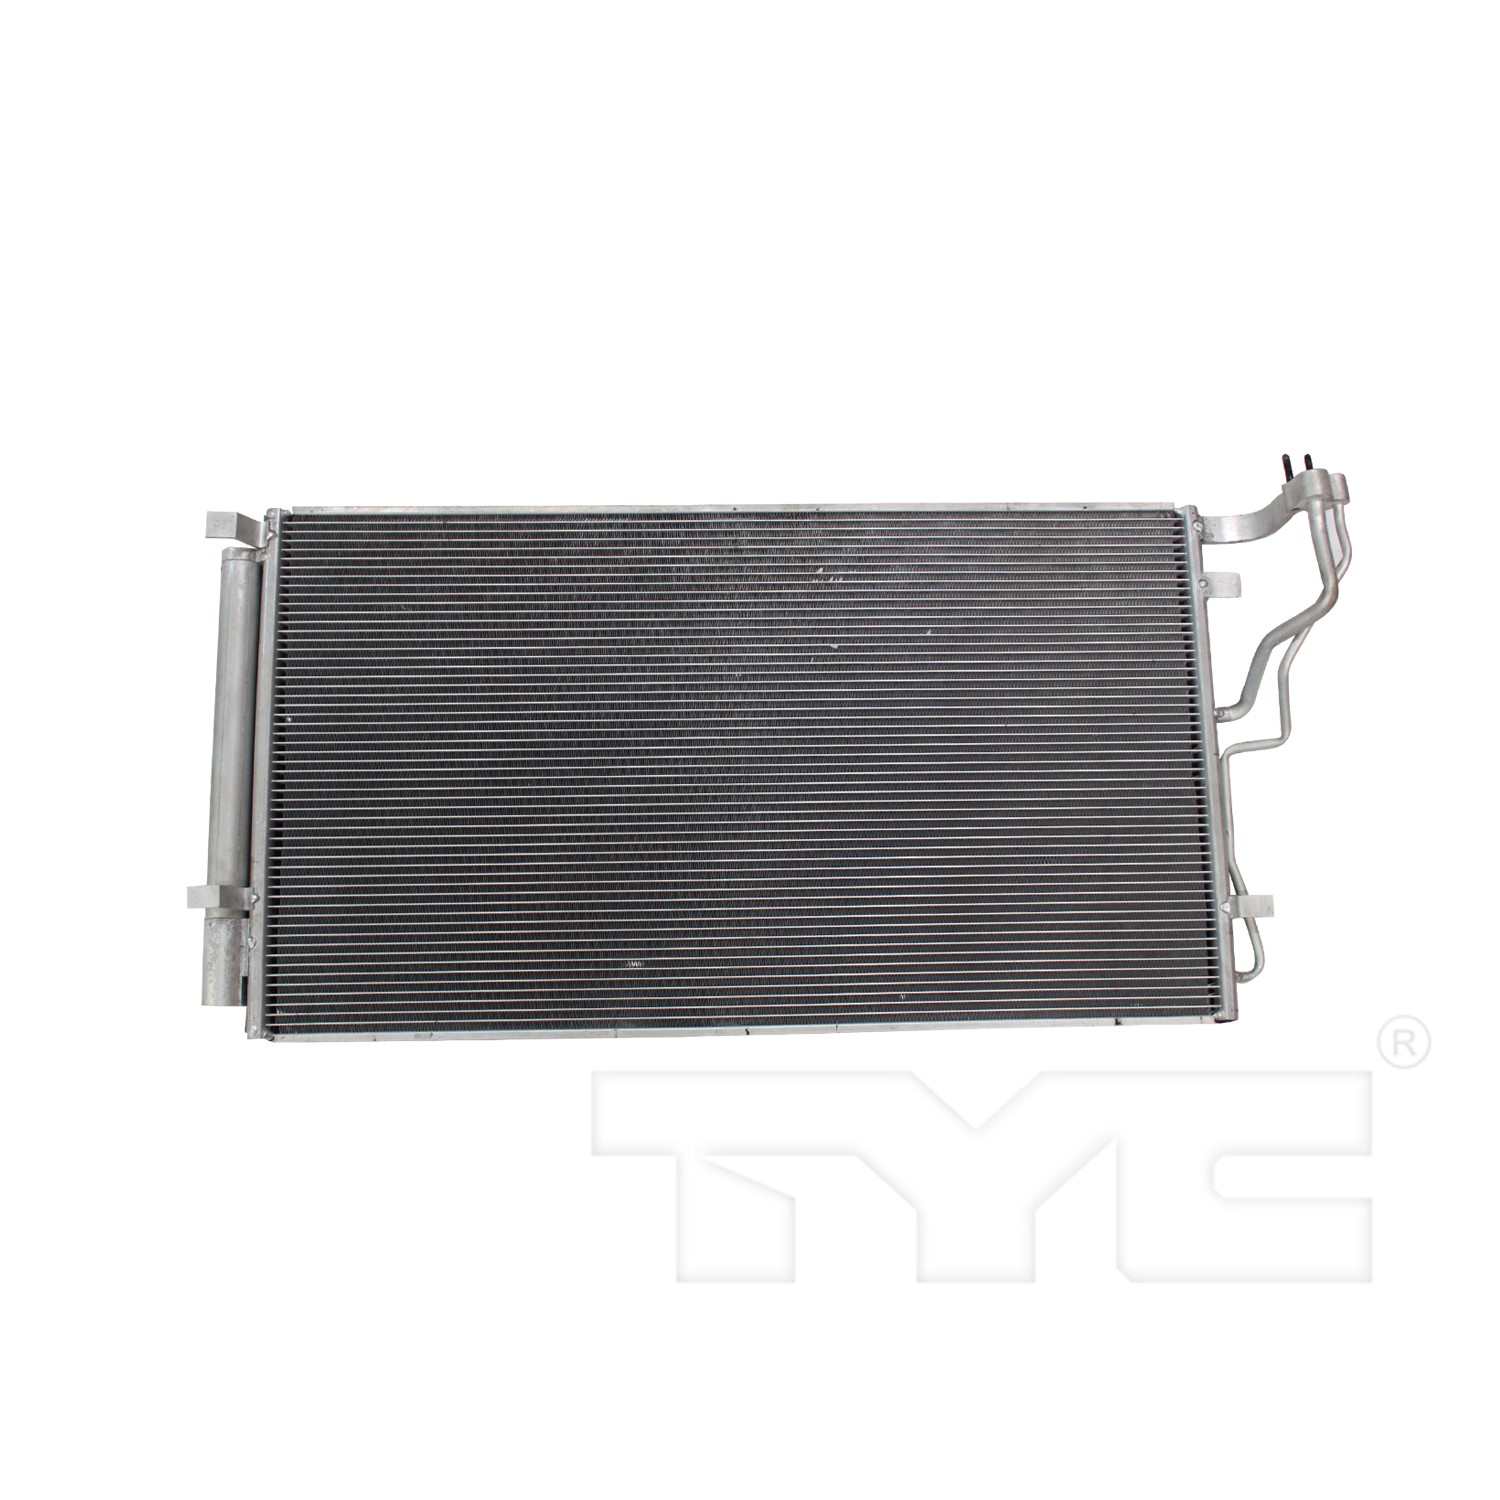 Aftermarket AC CONDENSERS for KIA - OPTIMA, OPTIMA,11-15,Air conditioning condenser